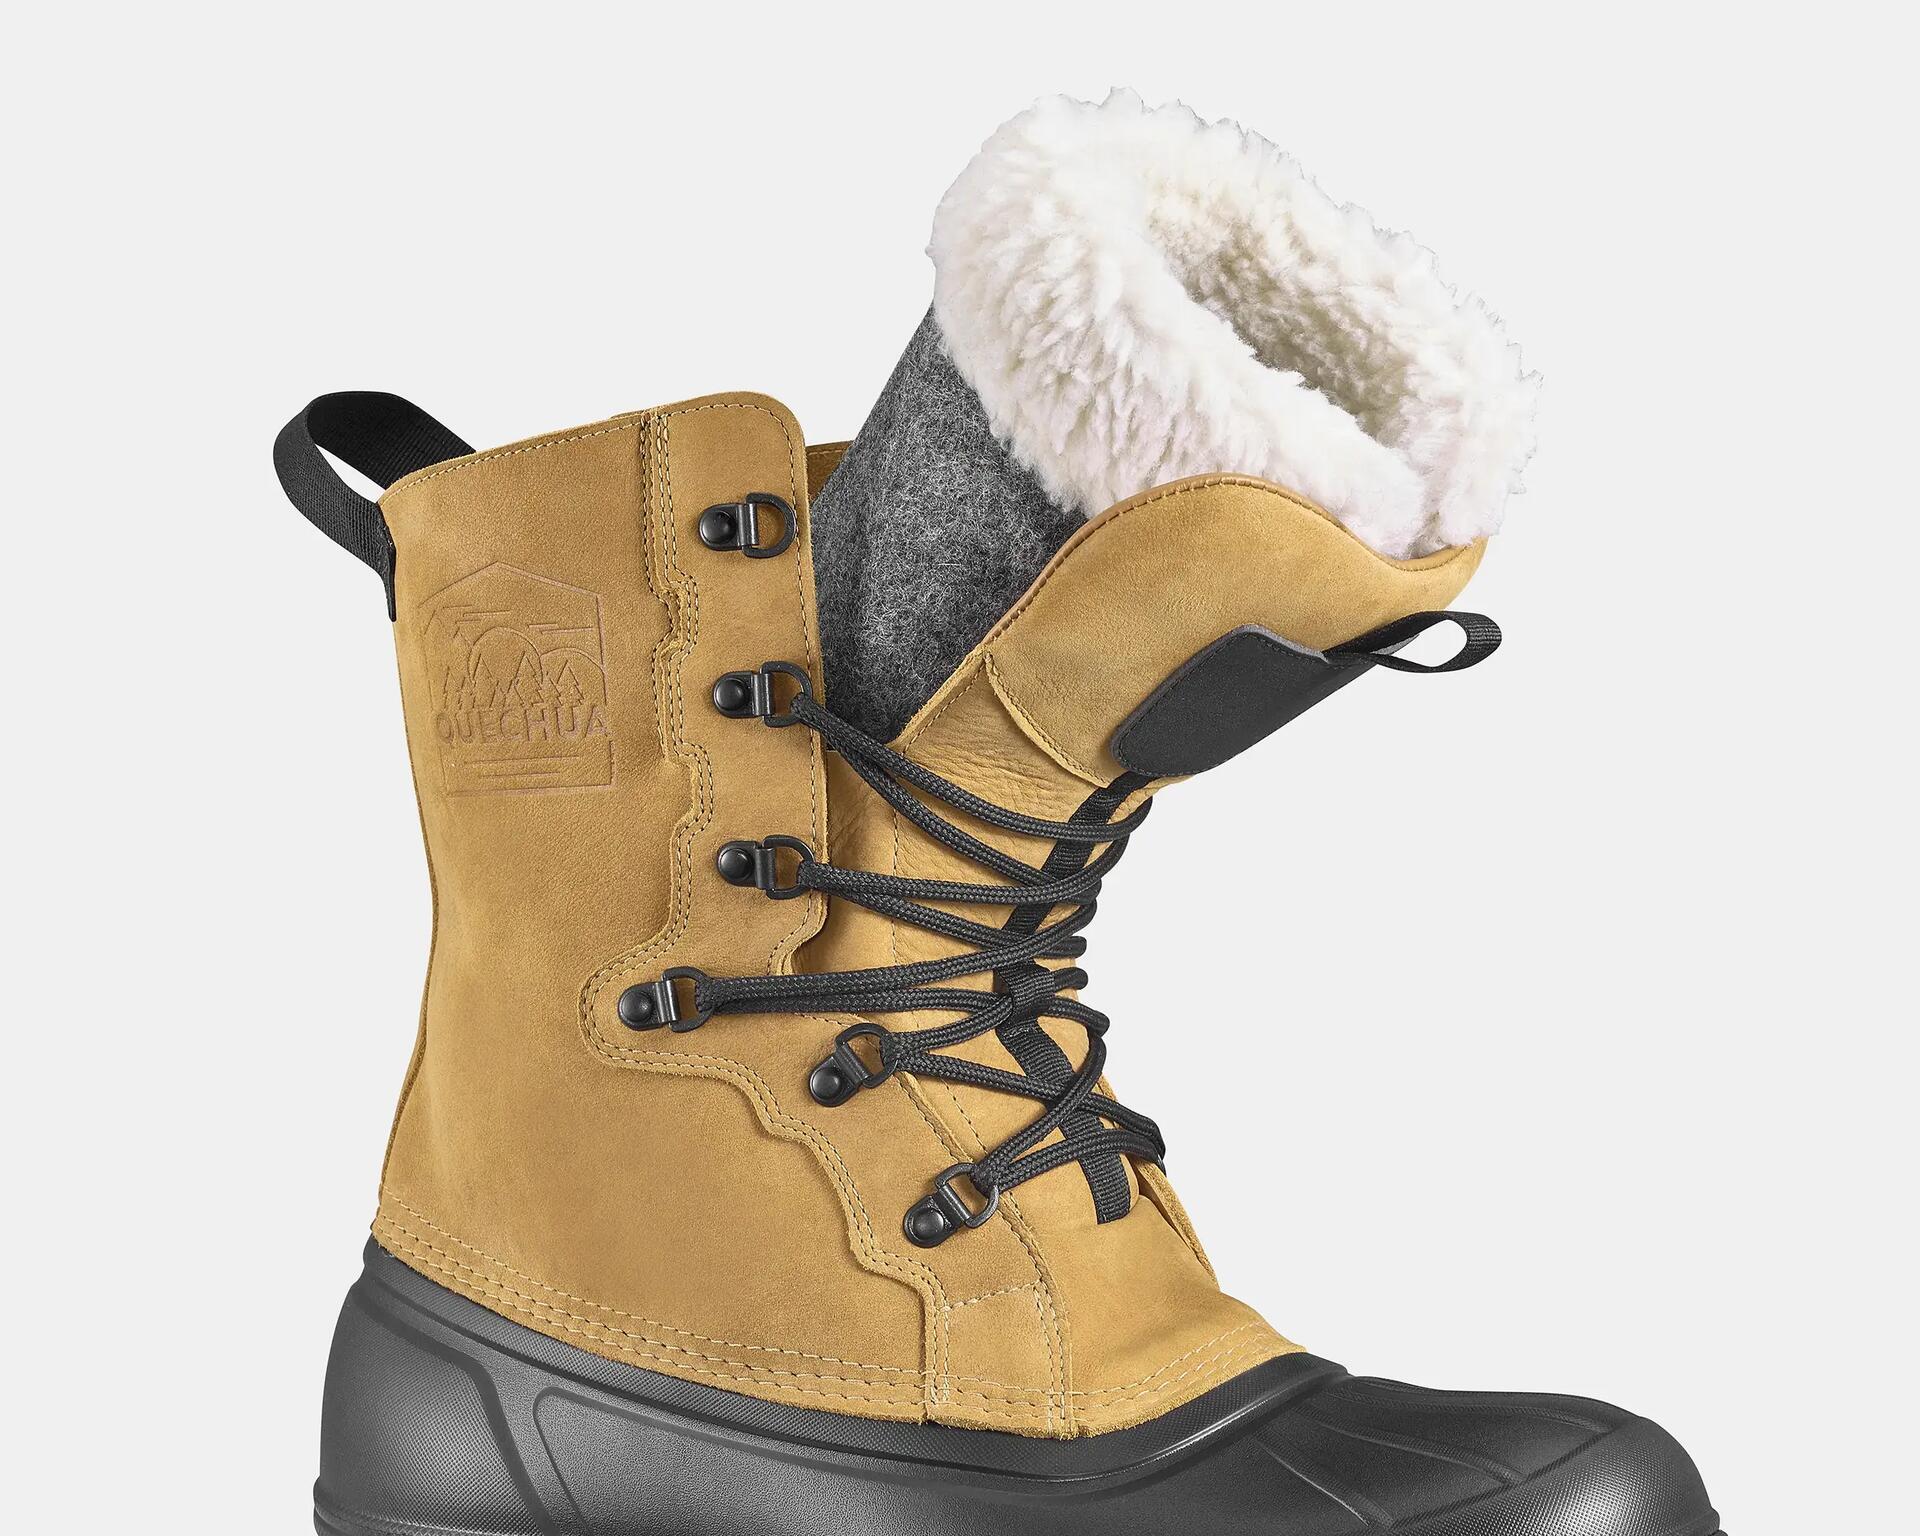 BOOTS WARM SH900 HIGH LEATHER M